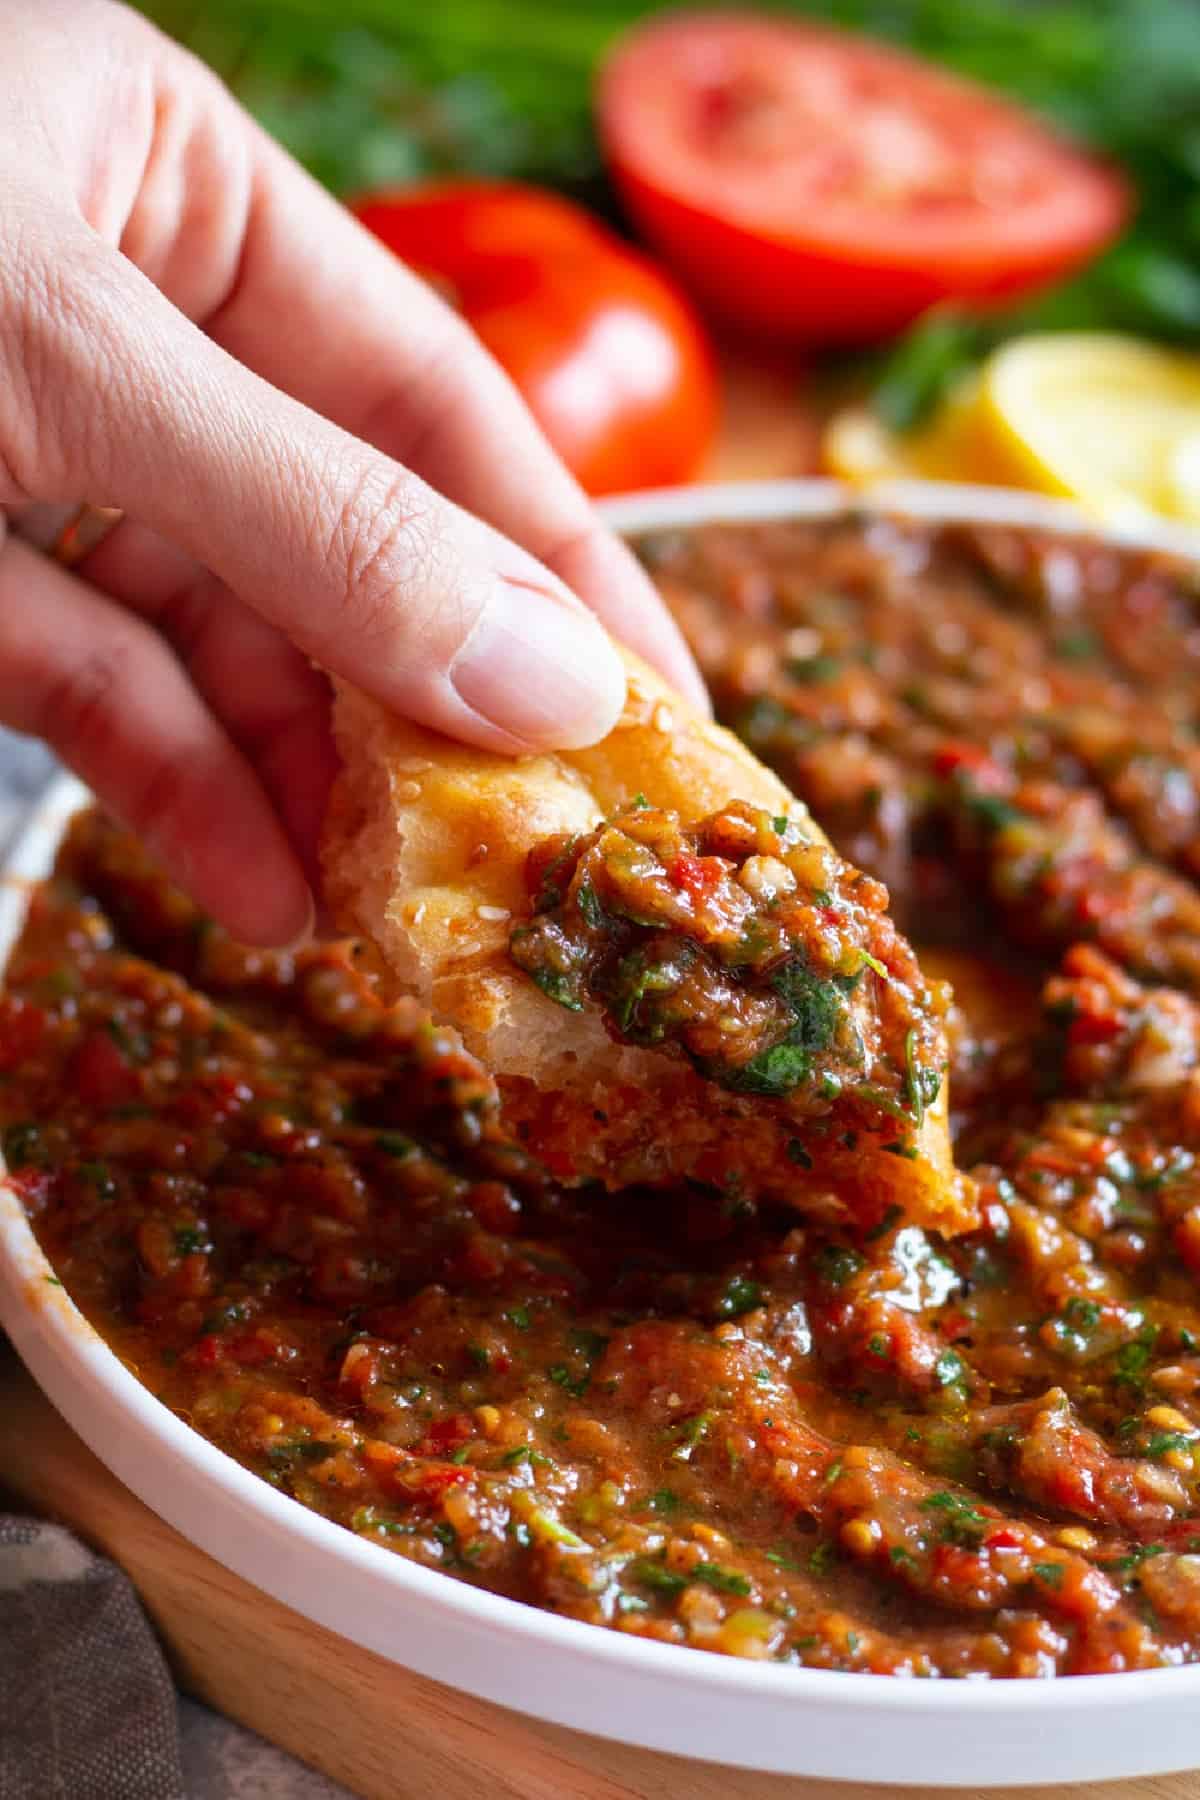 Ezme is a classic Turkish sauce, condiment and appetizer that’s usually served on the side of kebabs with some fresh bread. It’s ready in 10 minutes and is so delicious thanks to tomatoes, peppers and herbs.